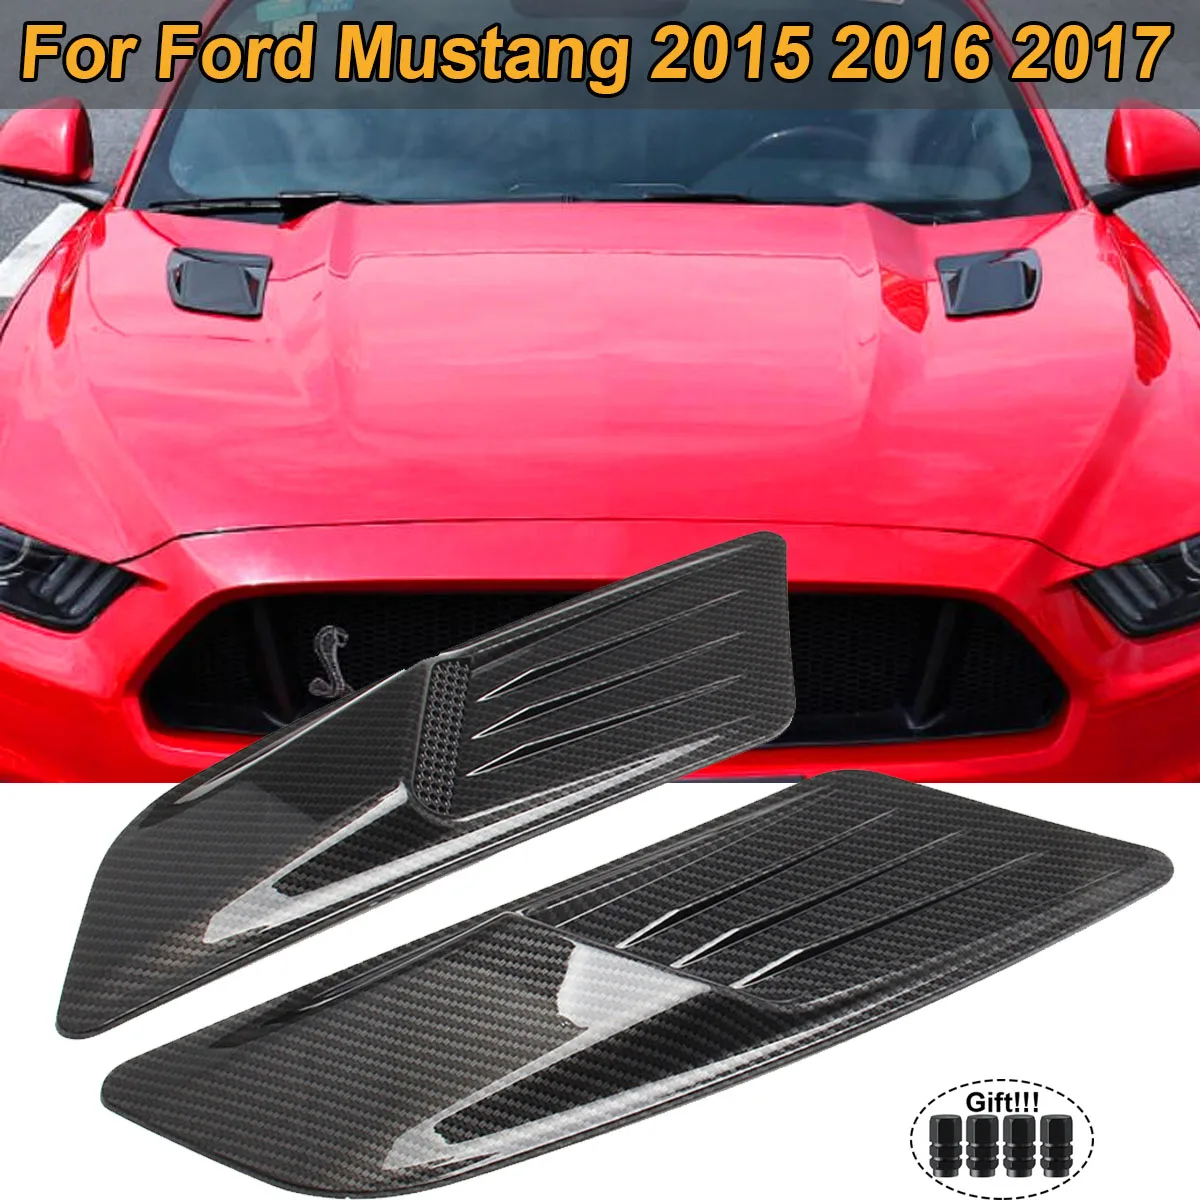 Front Engine Hood Air Flow Intake Scoop Bonnet Vent Cover Trim for Ford Mustang 2015 2016 2017 Decoration ONLY Car Accessories